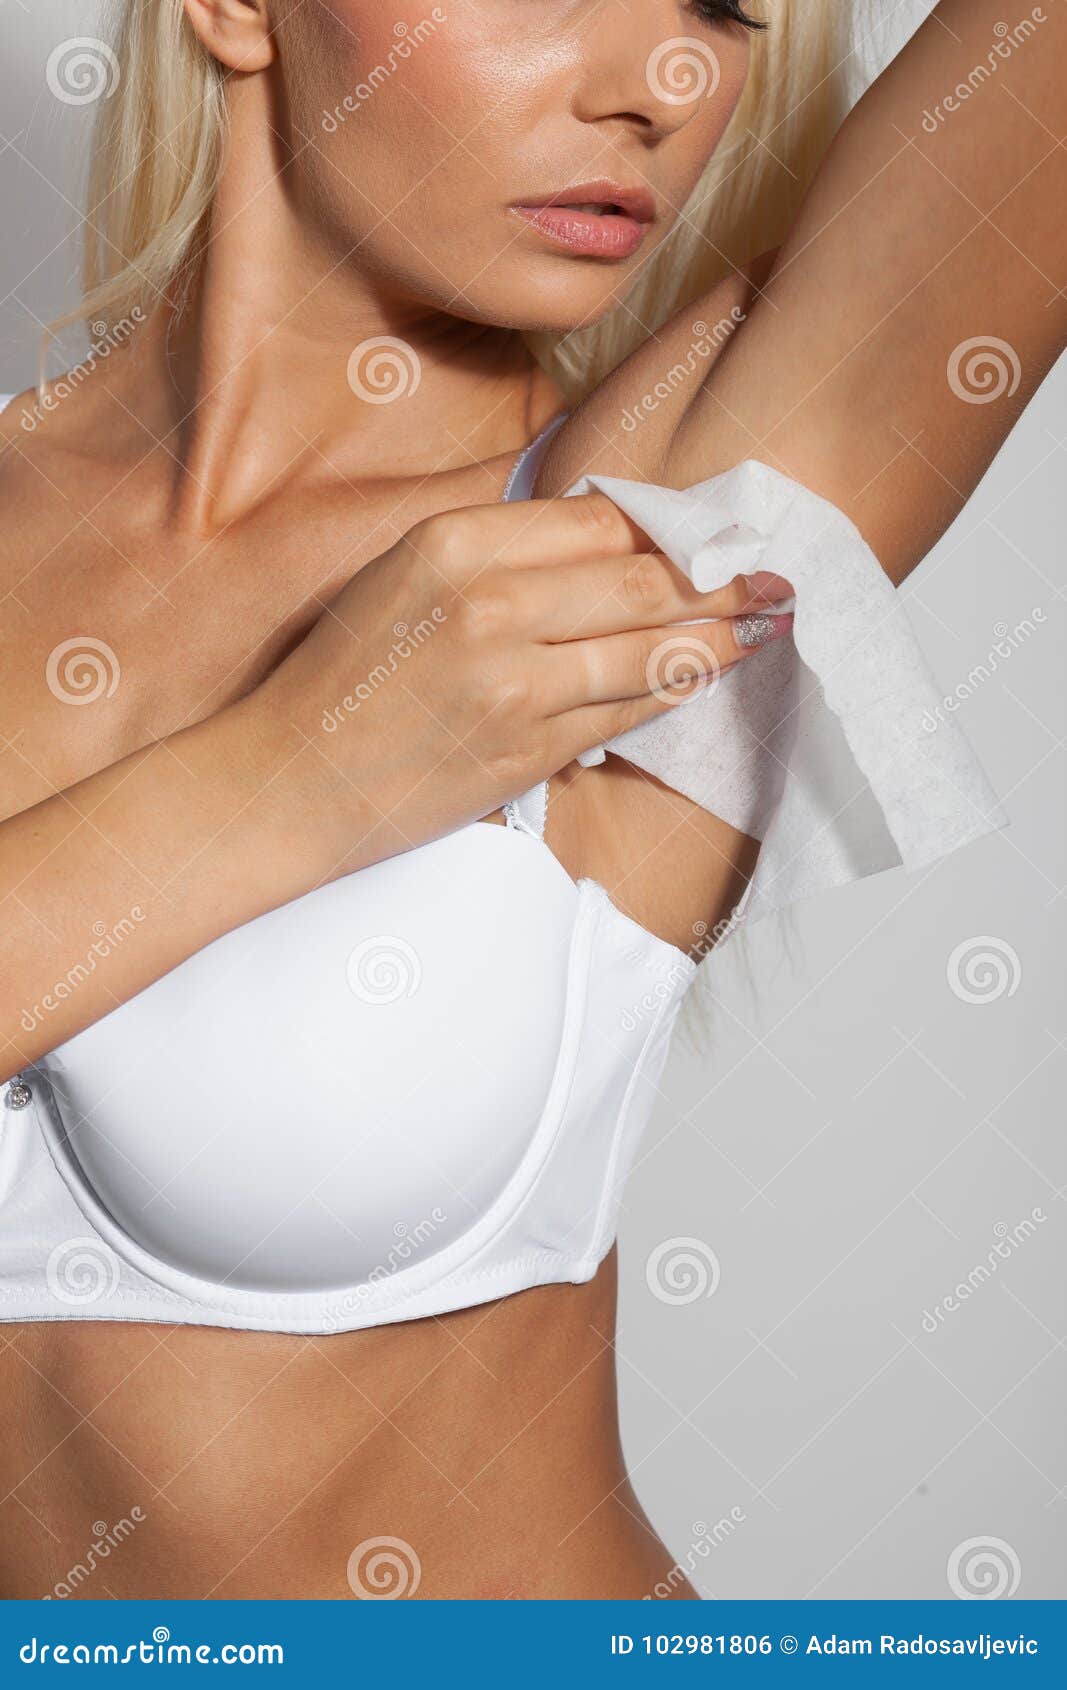 woman use wet wipes to clean armpit